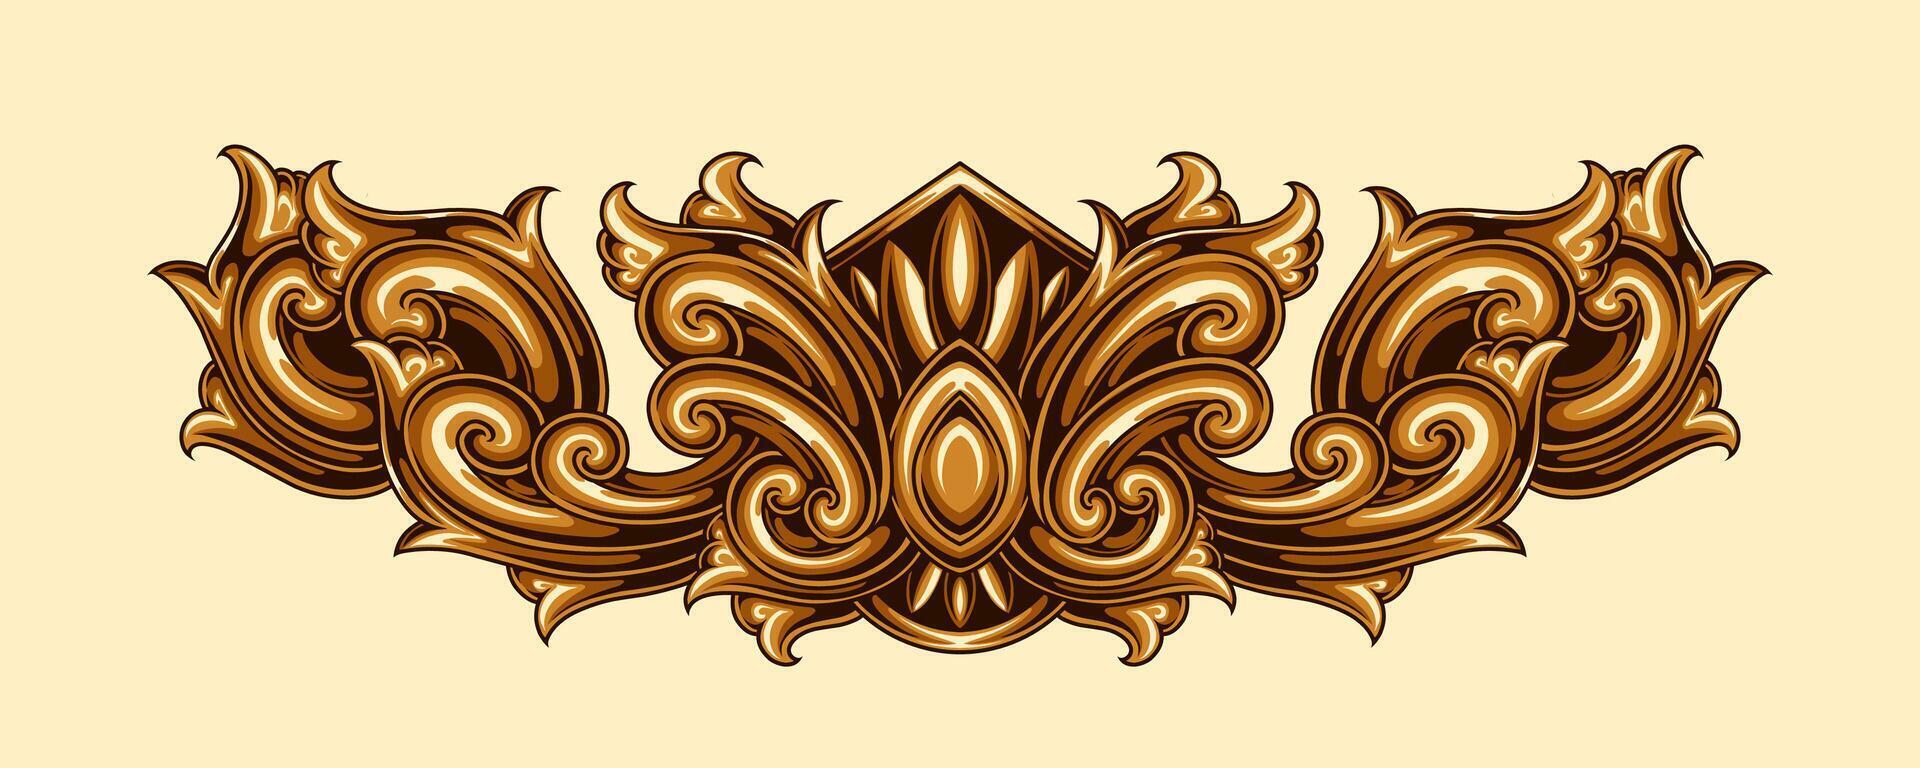 Classic style frame design with exquisite engraving and luxury vector